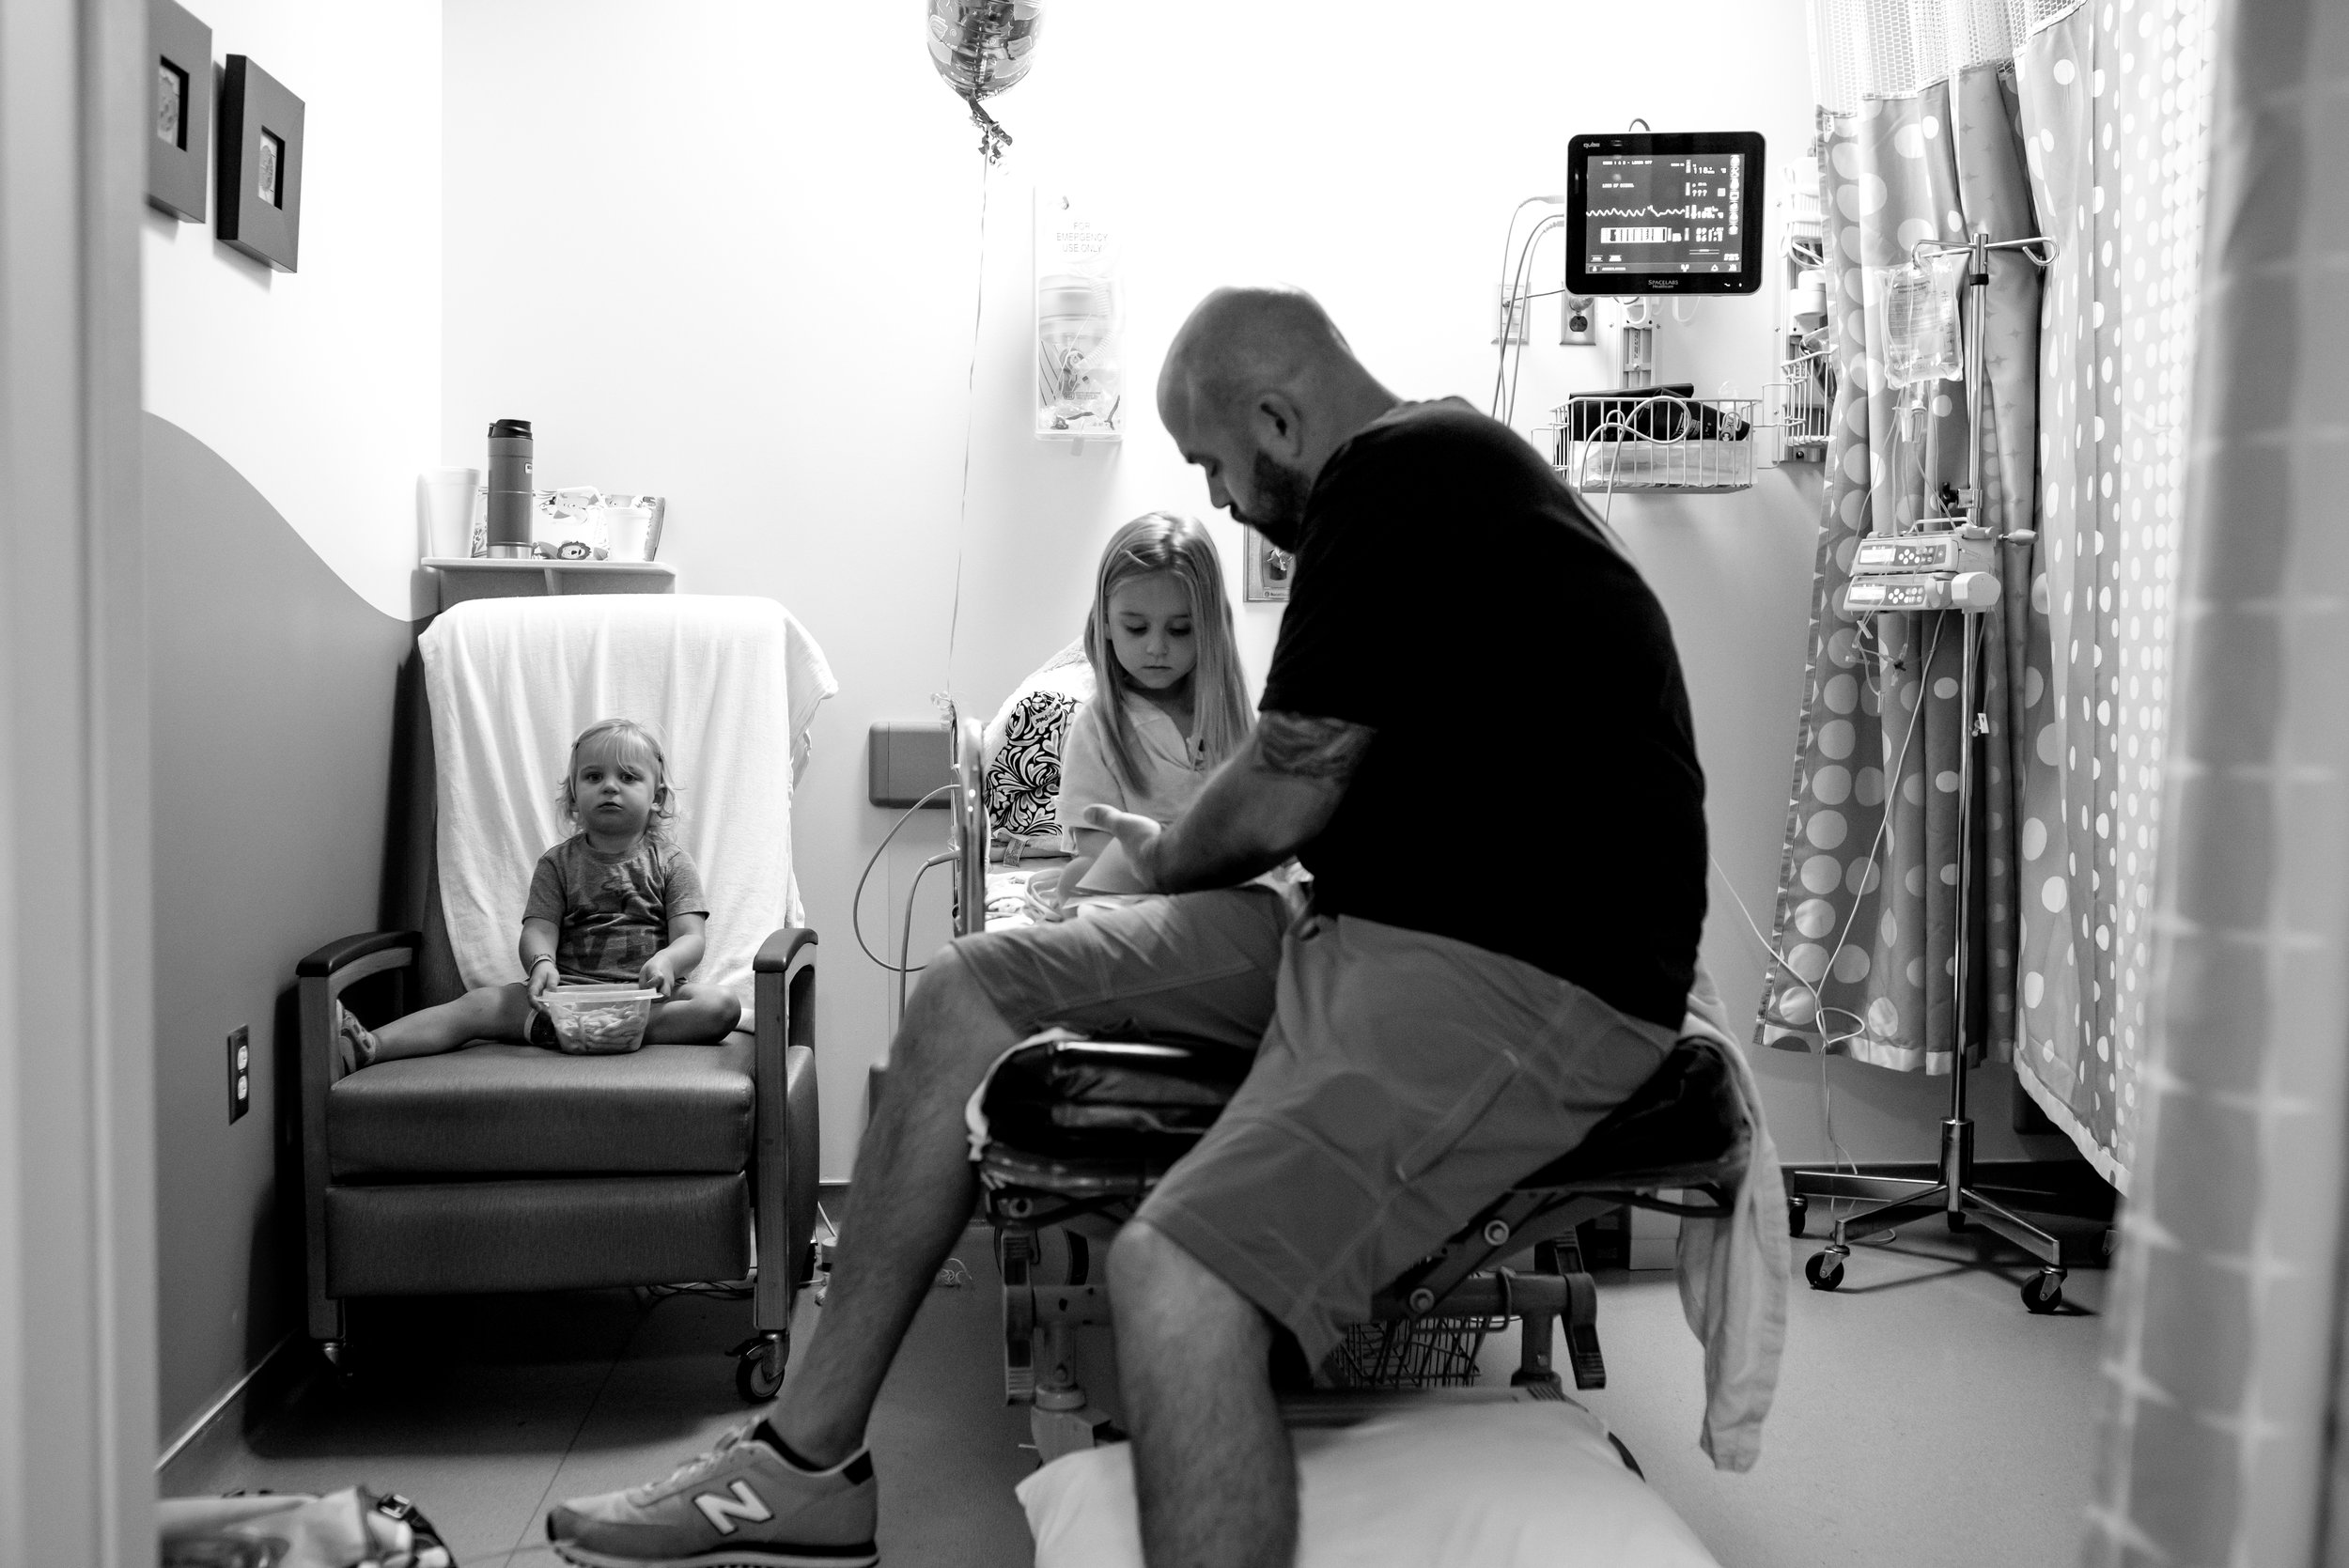 Dad and daughter look at book in hospital and girl eats snack